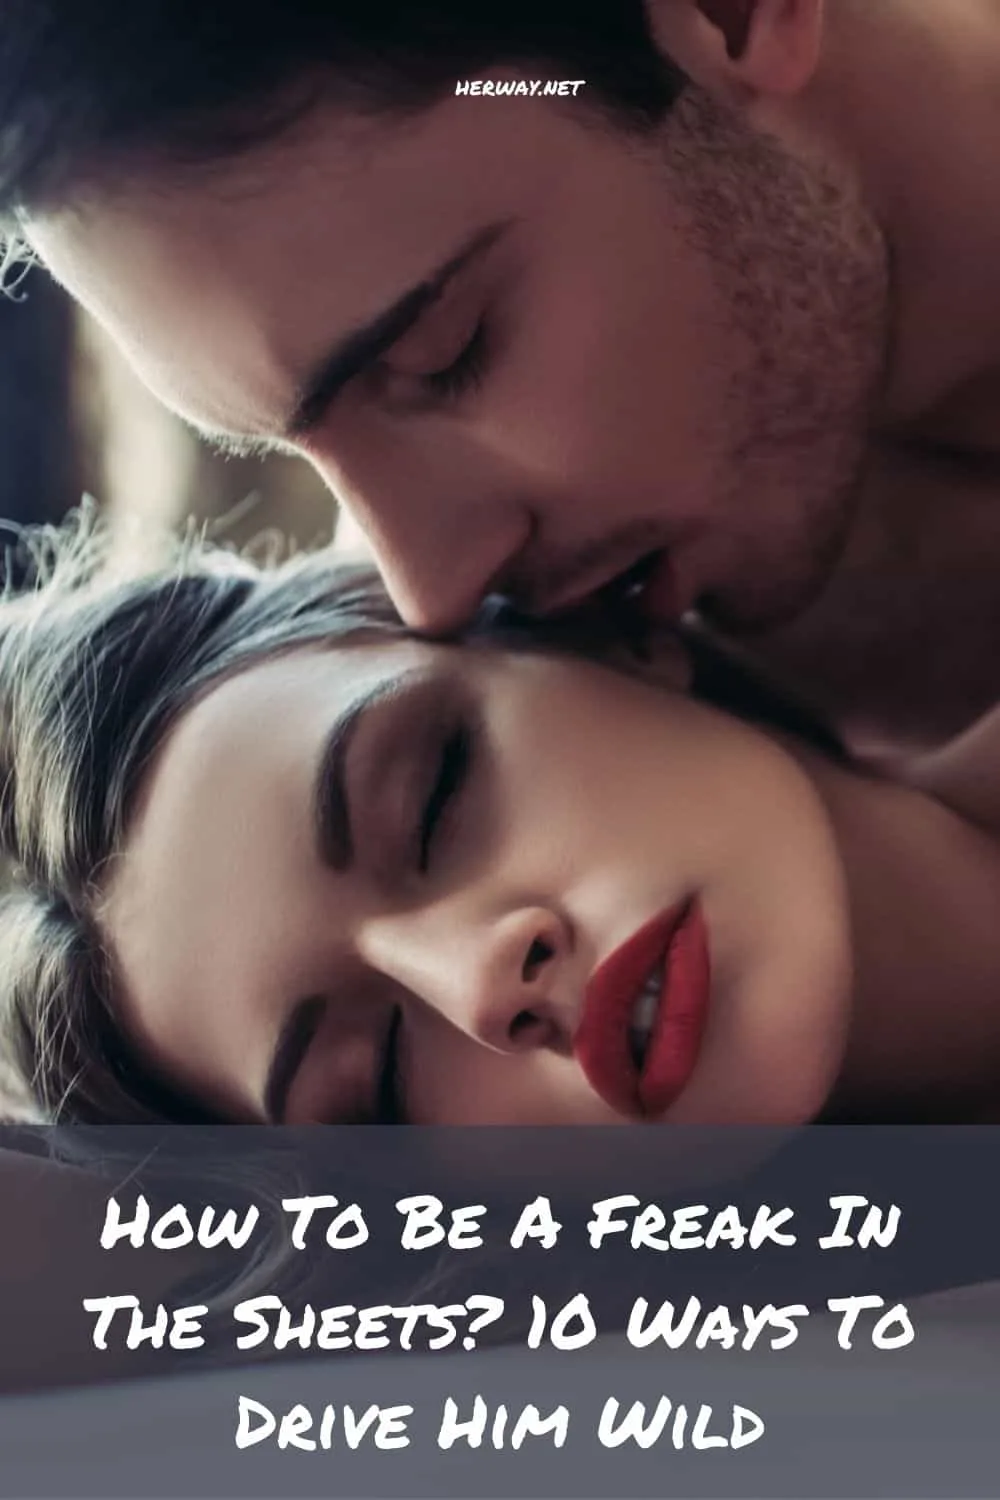 How To Be A Freak In The Sheets? 10 Ways To Drive Him Wild